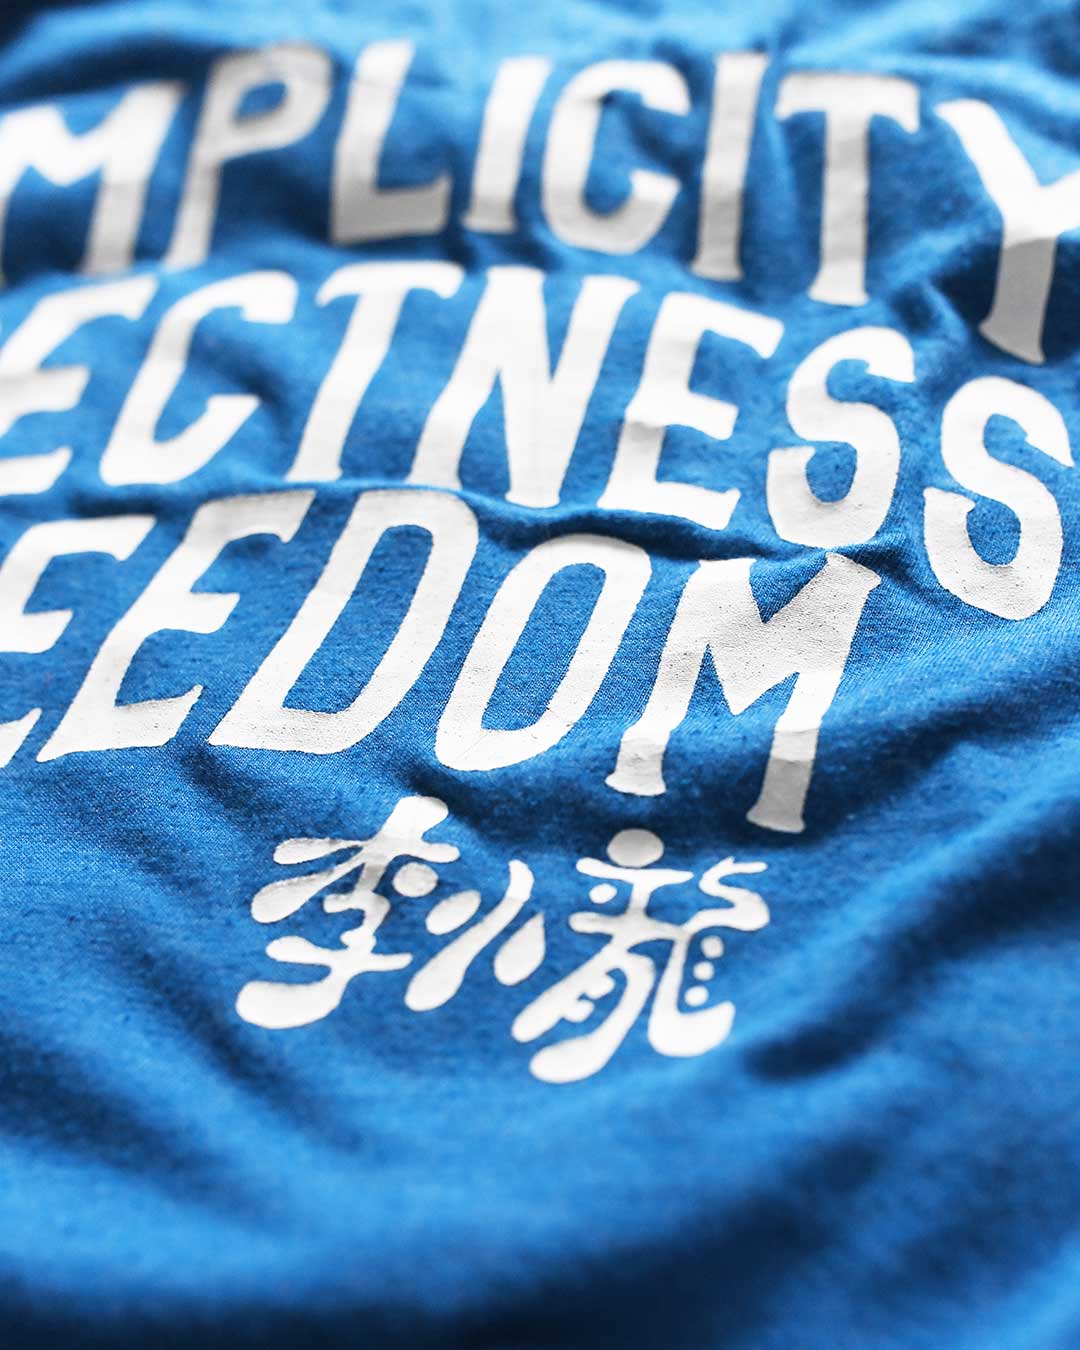 Bruce Lee Freedom Blue Tee - Roots of Fight Canada